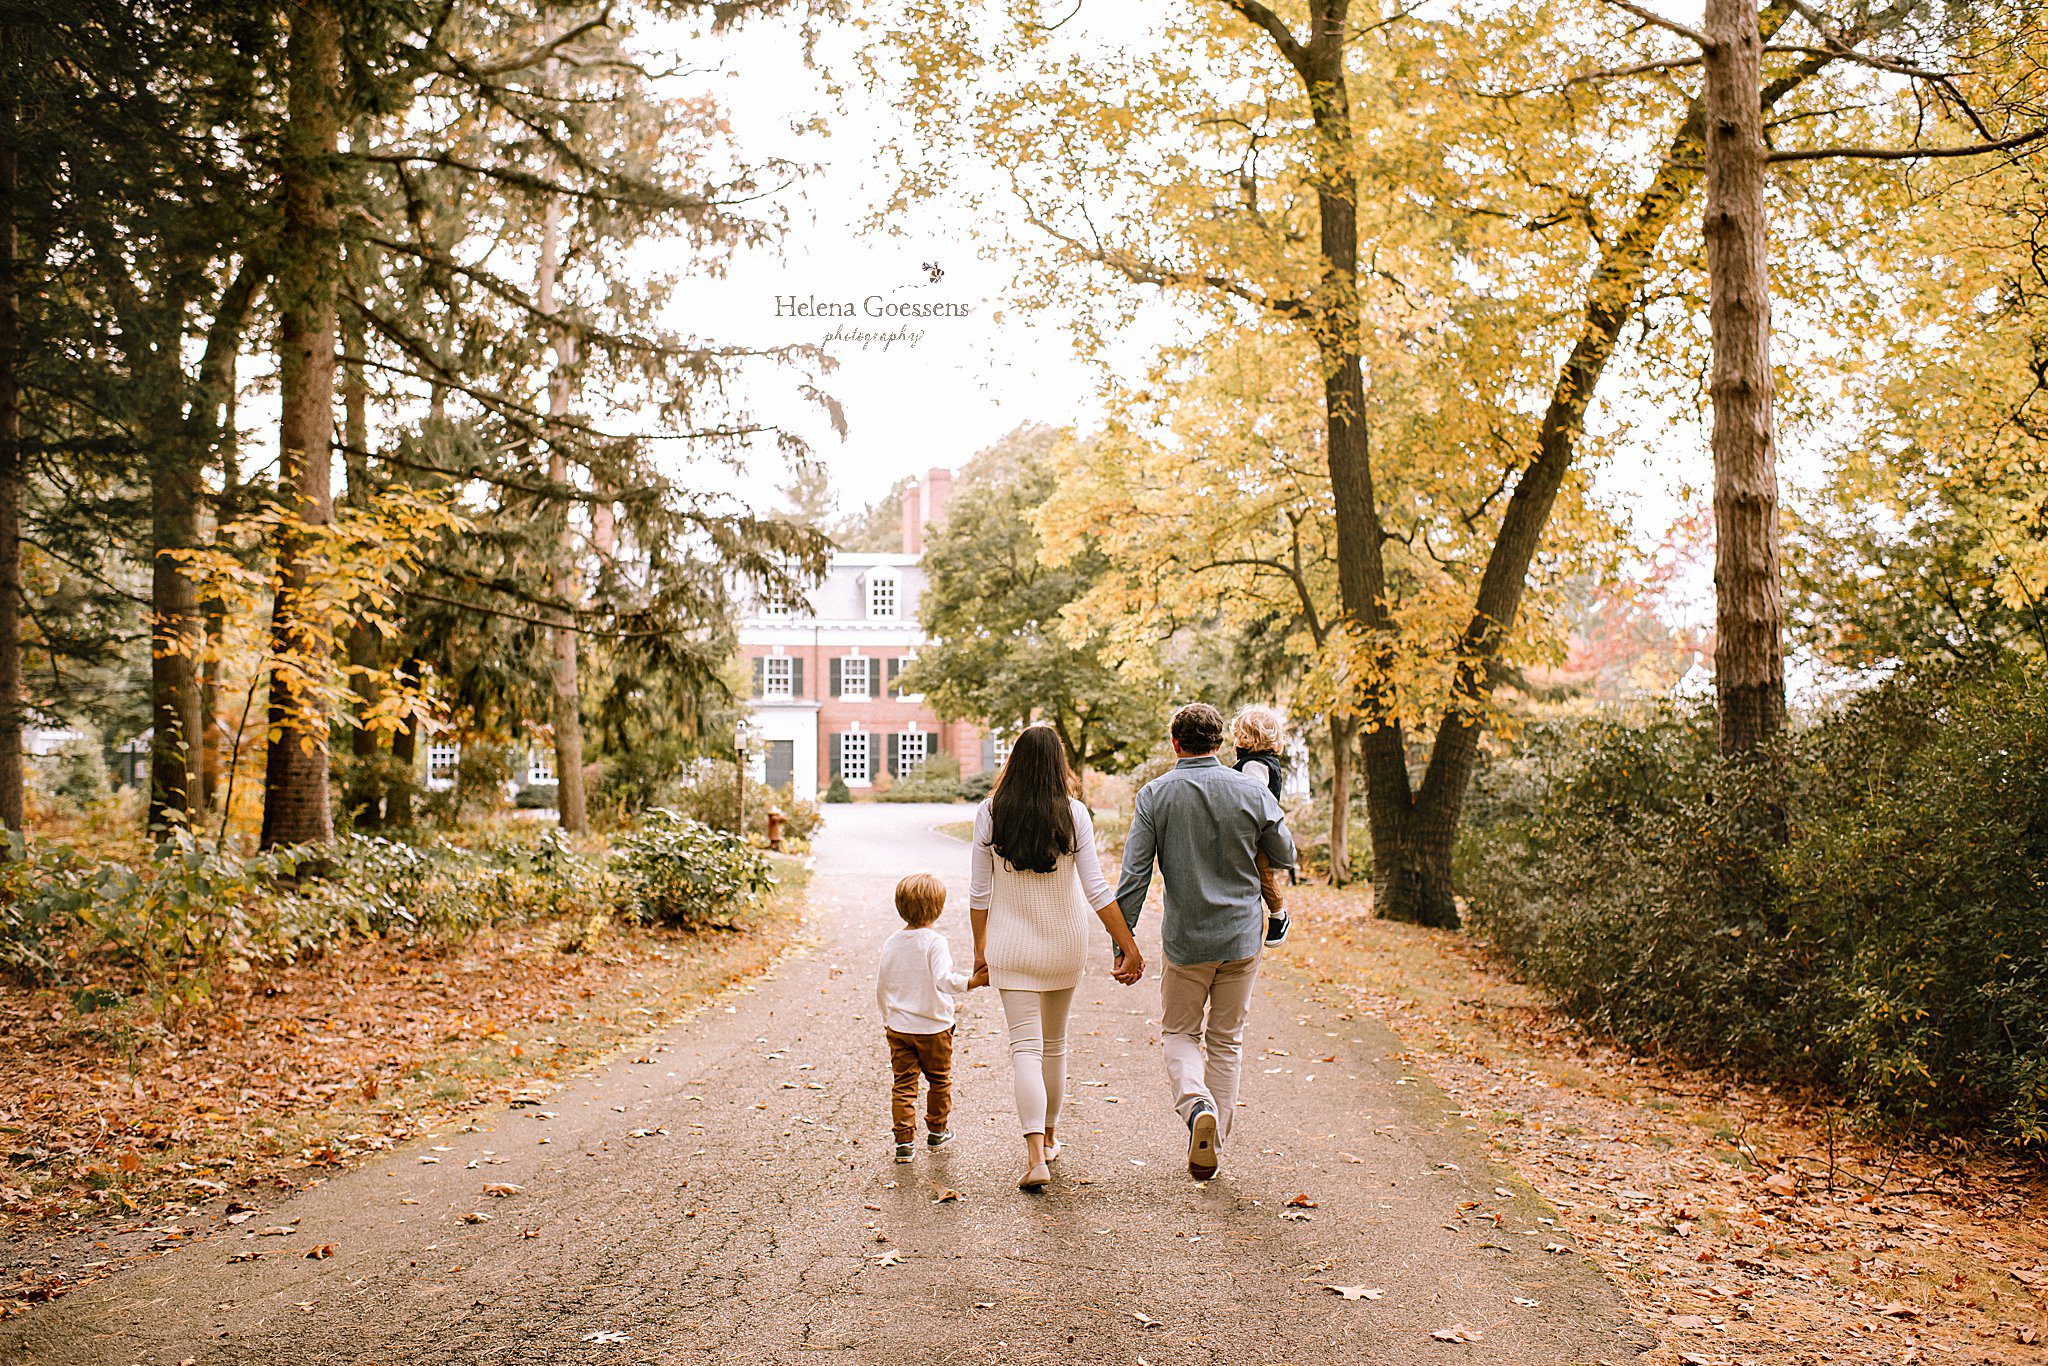 Helena Goessens Photography photographs fall portraits at Bradley Estate in Canton MA